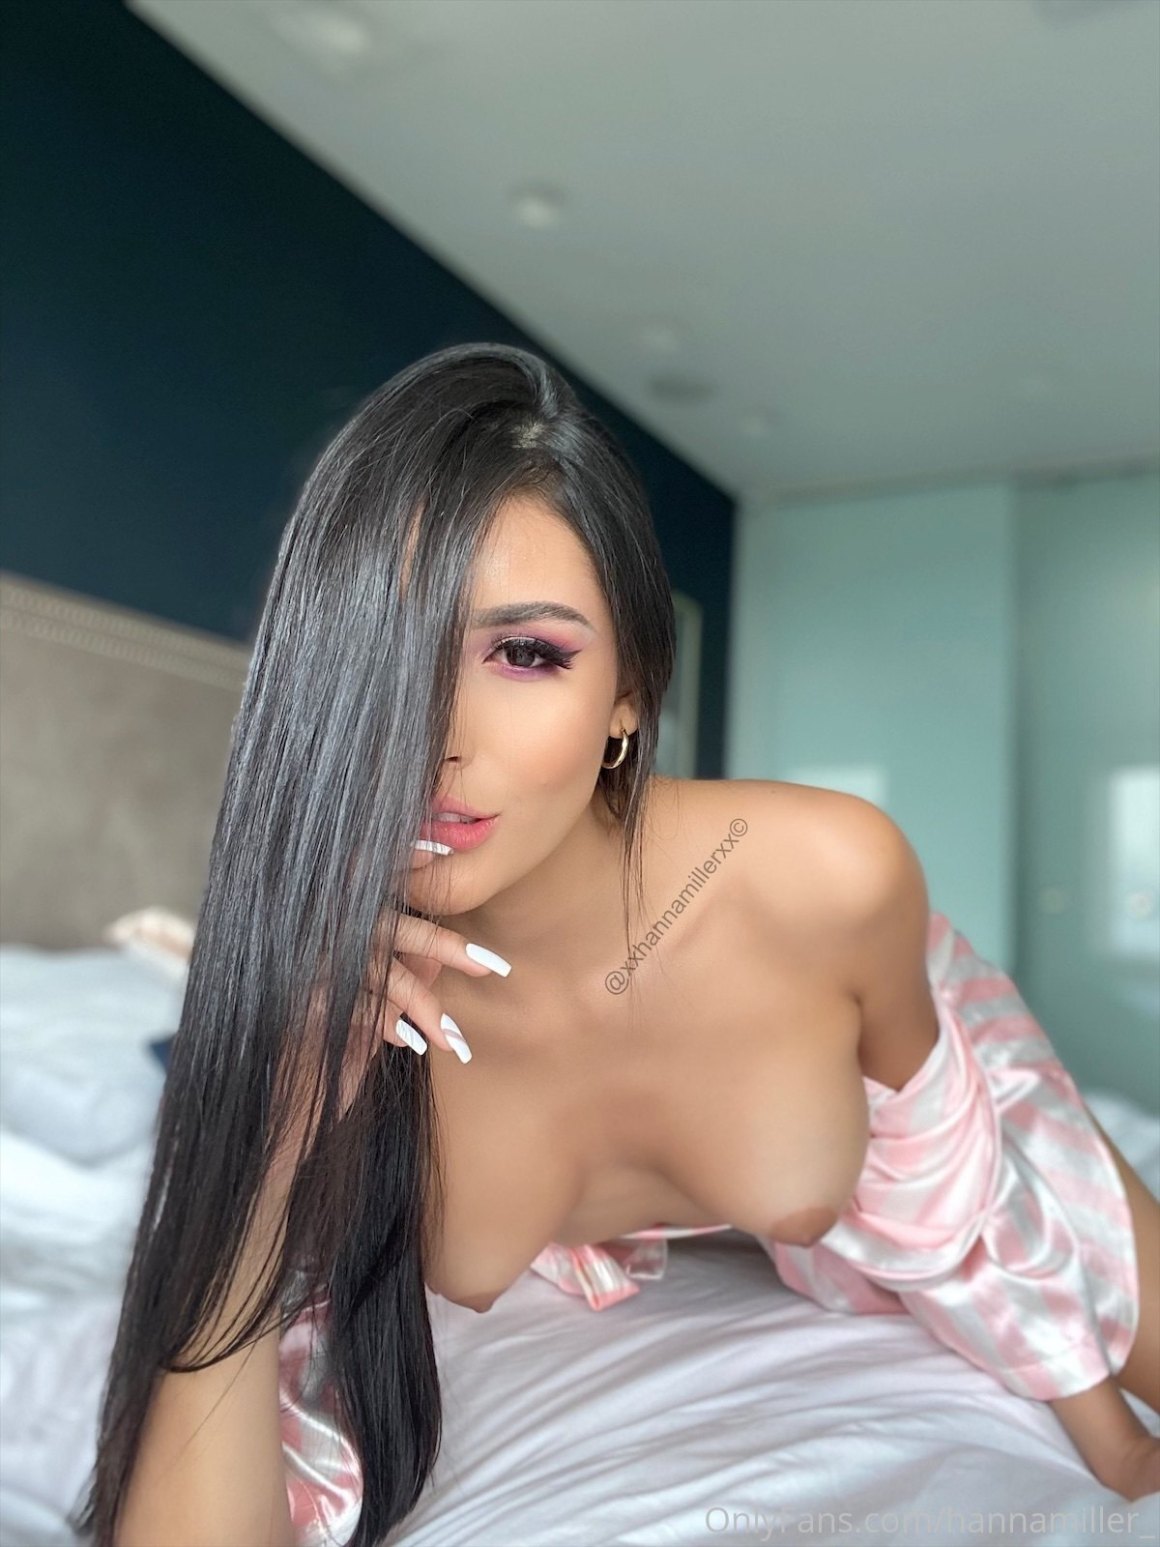 AsianOnlyfans 073 225 20201127